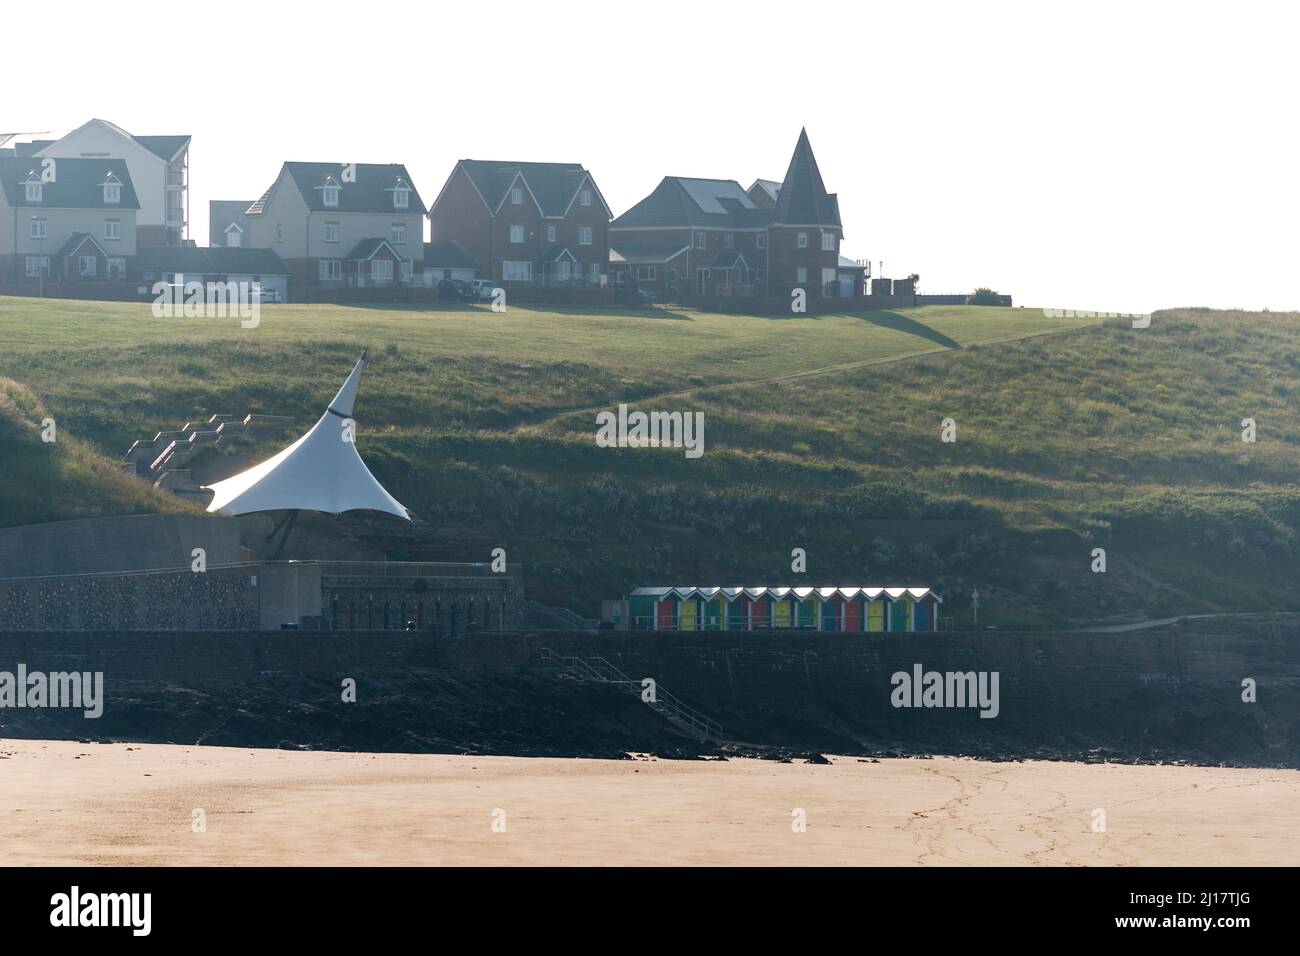 Houses and beach huts on Nell's Point overlook the deserted sandy beach at Whitmore Bay, Barry Island early in the morning on a sunny day. Stock Photo